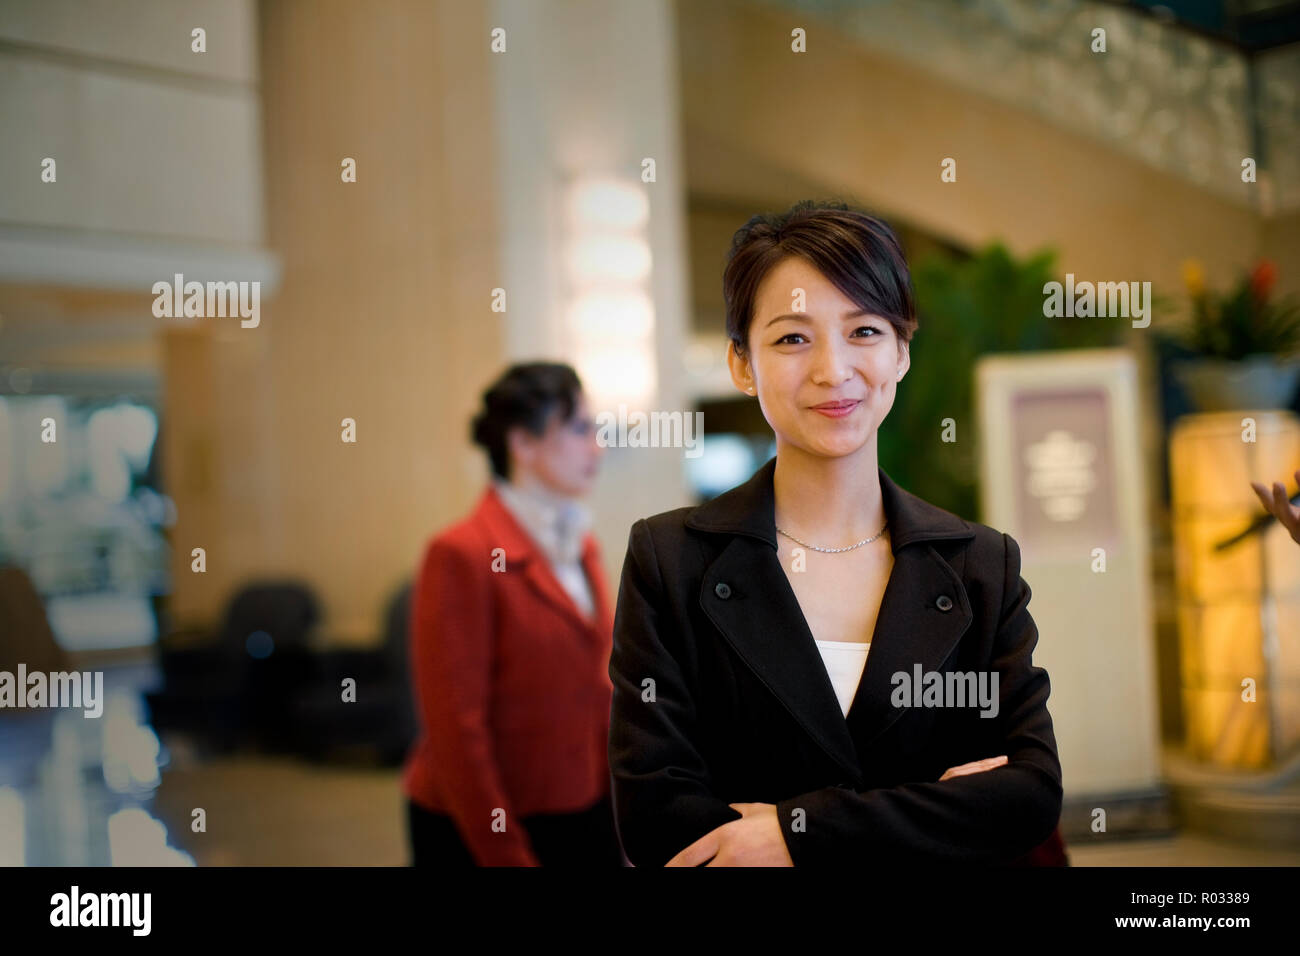 Portrait of a young adult business woman standing in a lobby. Stock Photo